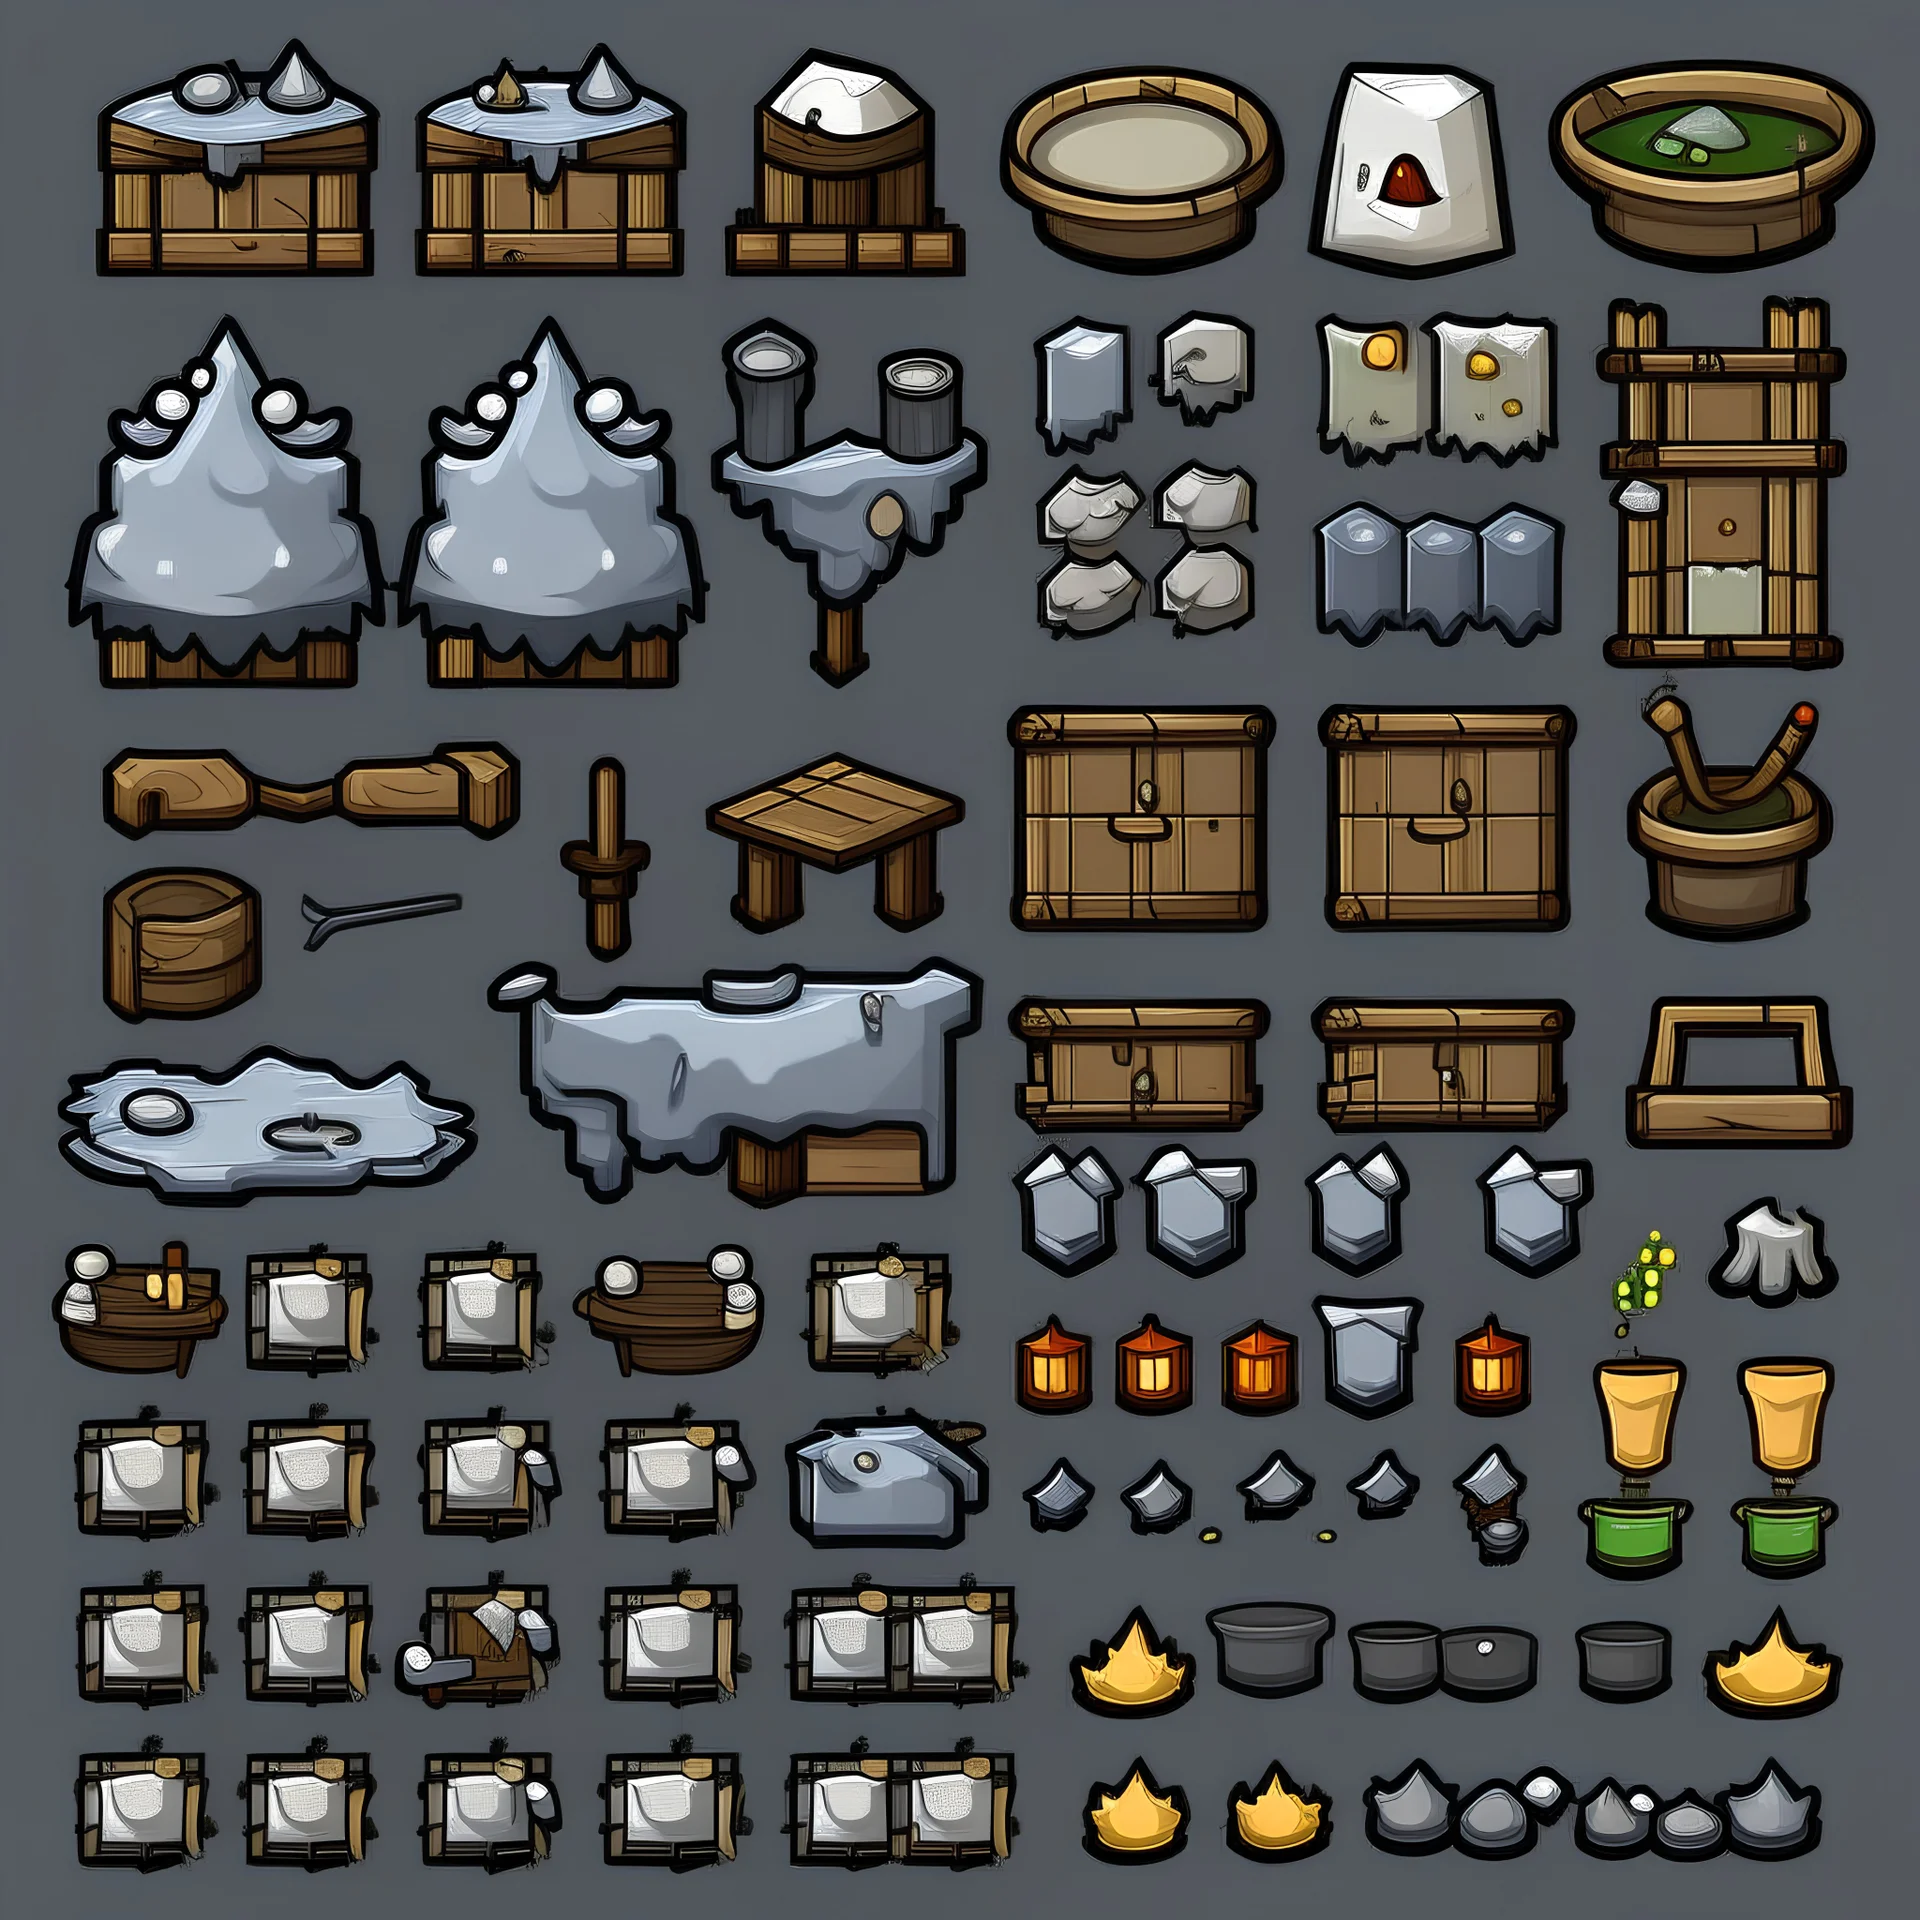 Sprite sheet, Wood, Nails, Metal scrap, Electronics, Tarps, Water, Food, Clothing, Tools, icons, survival game, gray background, comic book,